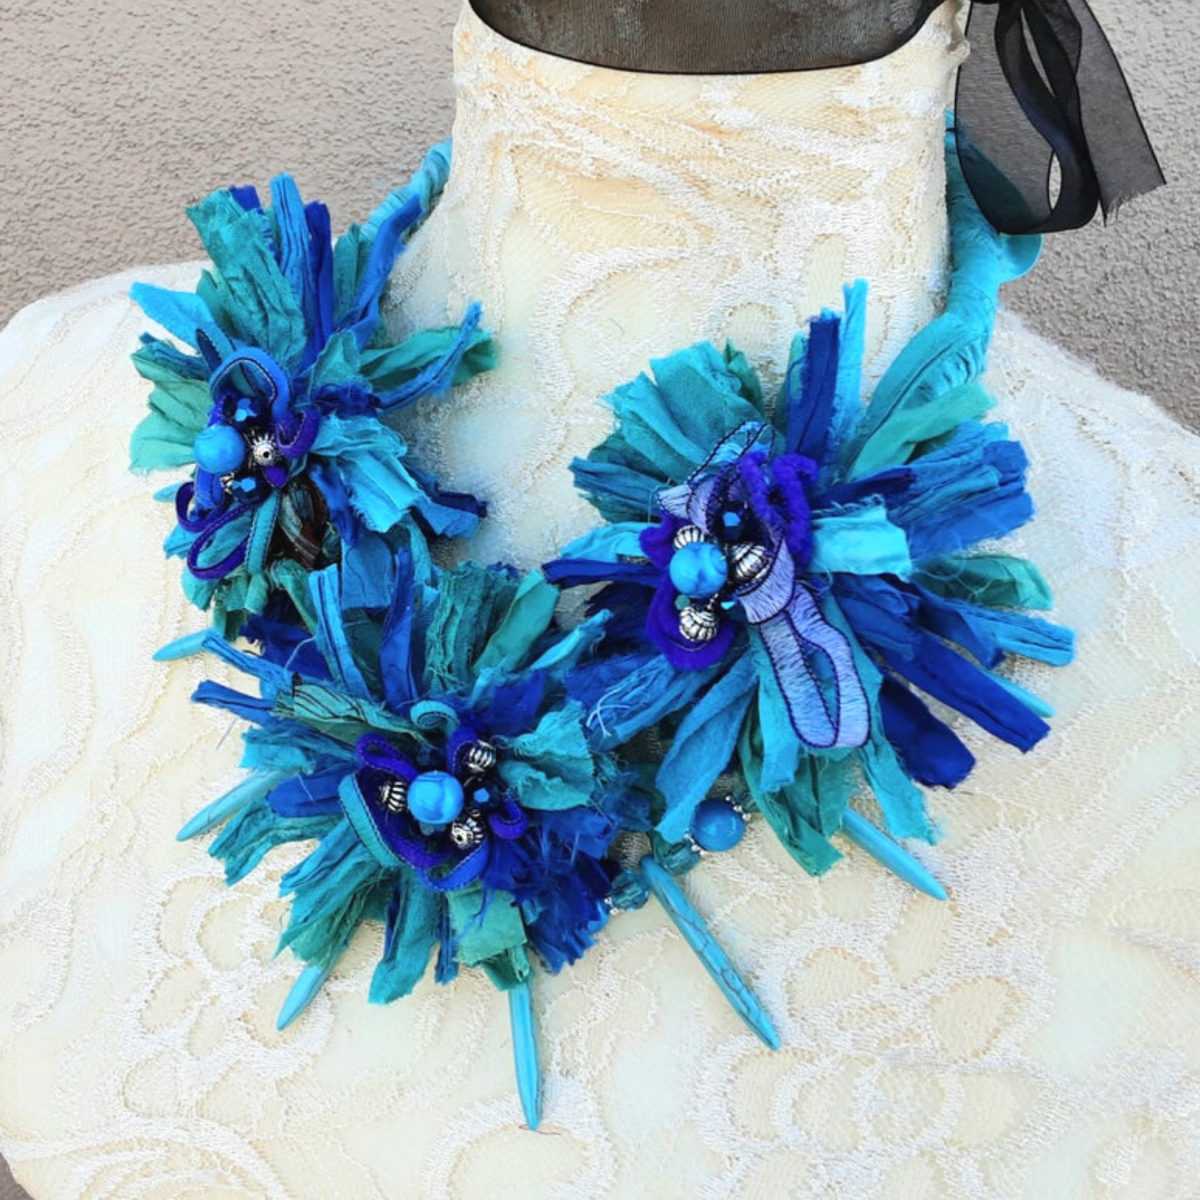 Boho Turquoise Flower Statement Necklace - Colorful Gypsy Style Gift for Her - Unique Sari Ribbon Collar